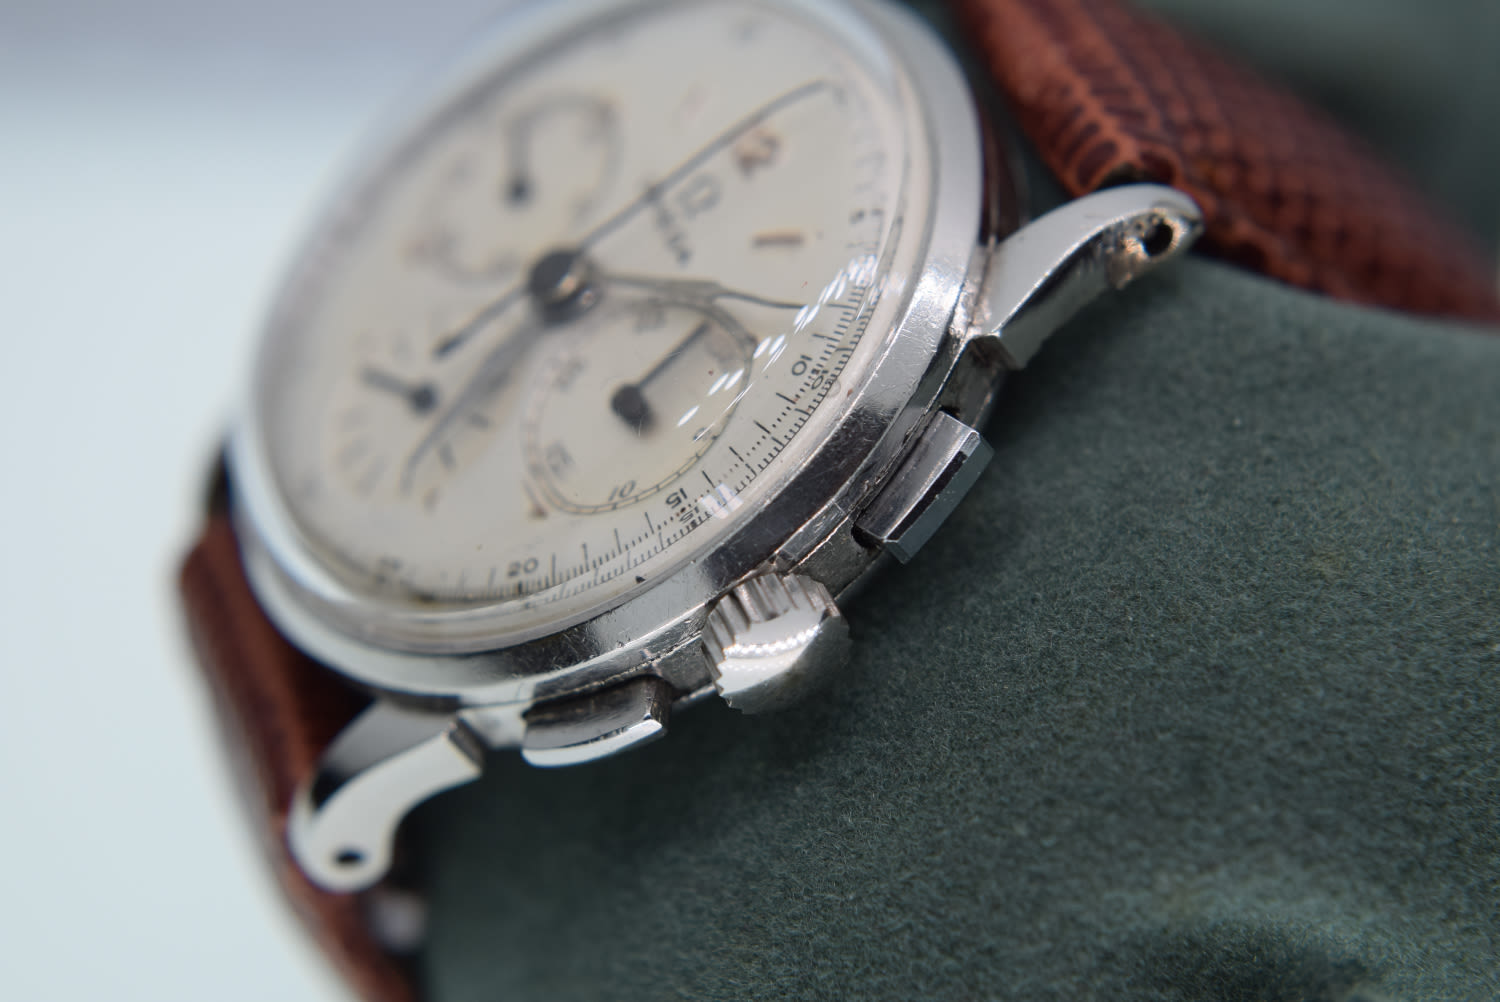 VINTAGE OMEGA WATCH WITH CHRONOGRAPH WITH OMEGA MANUAL WIND MOVEMENT - Image 2 of 5